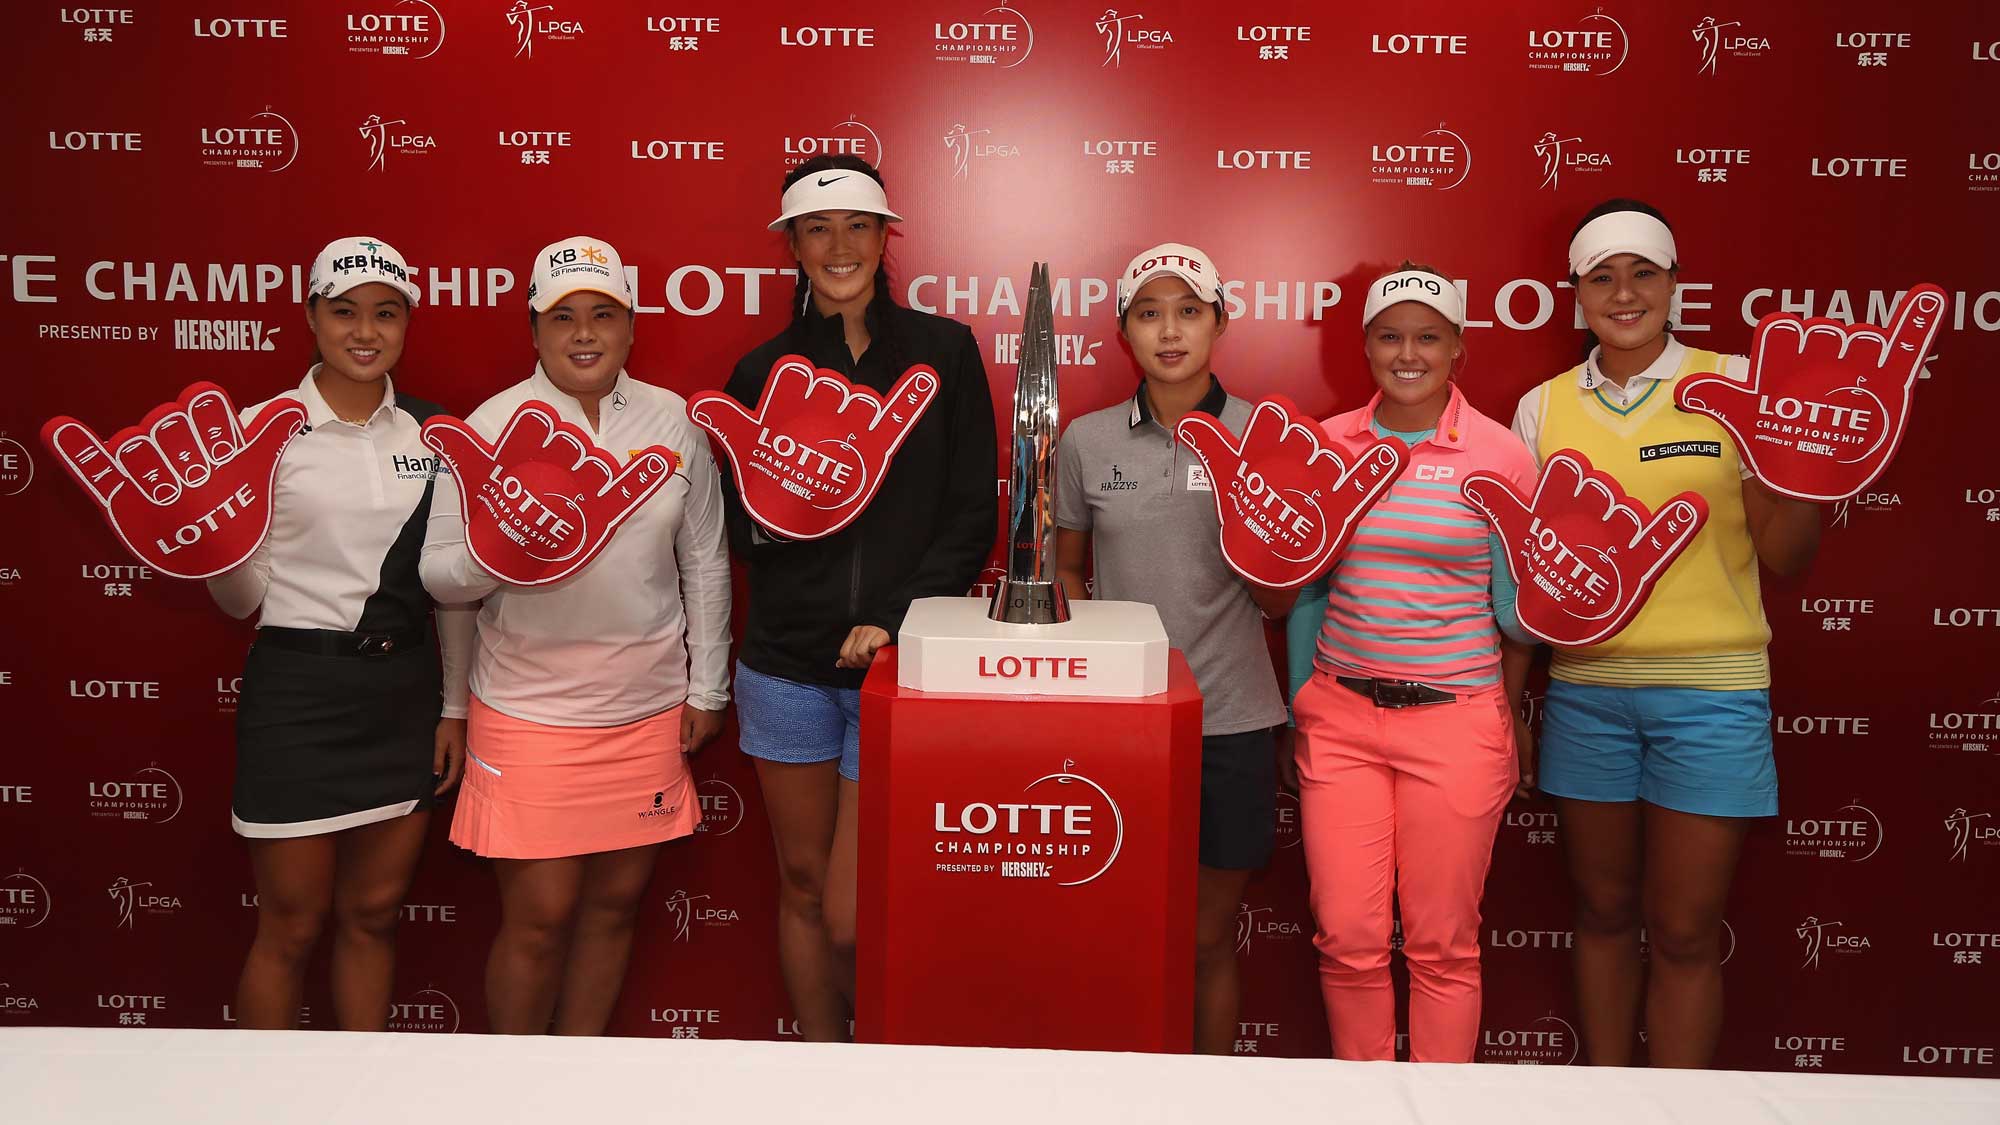 (L-R) Minjee Lee, Inbee Park, Michelle Wie, Hyo Joo Kim, Brooke M. Henderson and In Gee Chun pose together at a press conference ahead of the LPGA LOTTE Championship Presented By Hershey at Ko Olina Golf Club